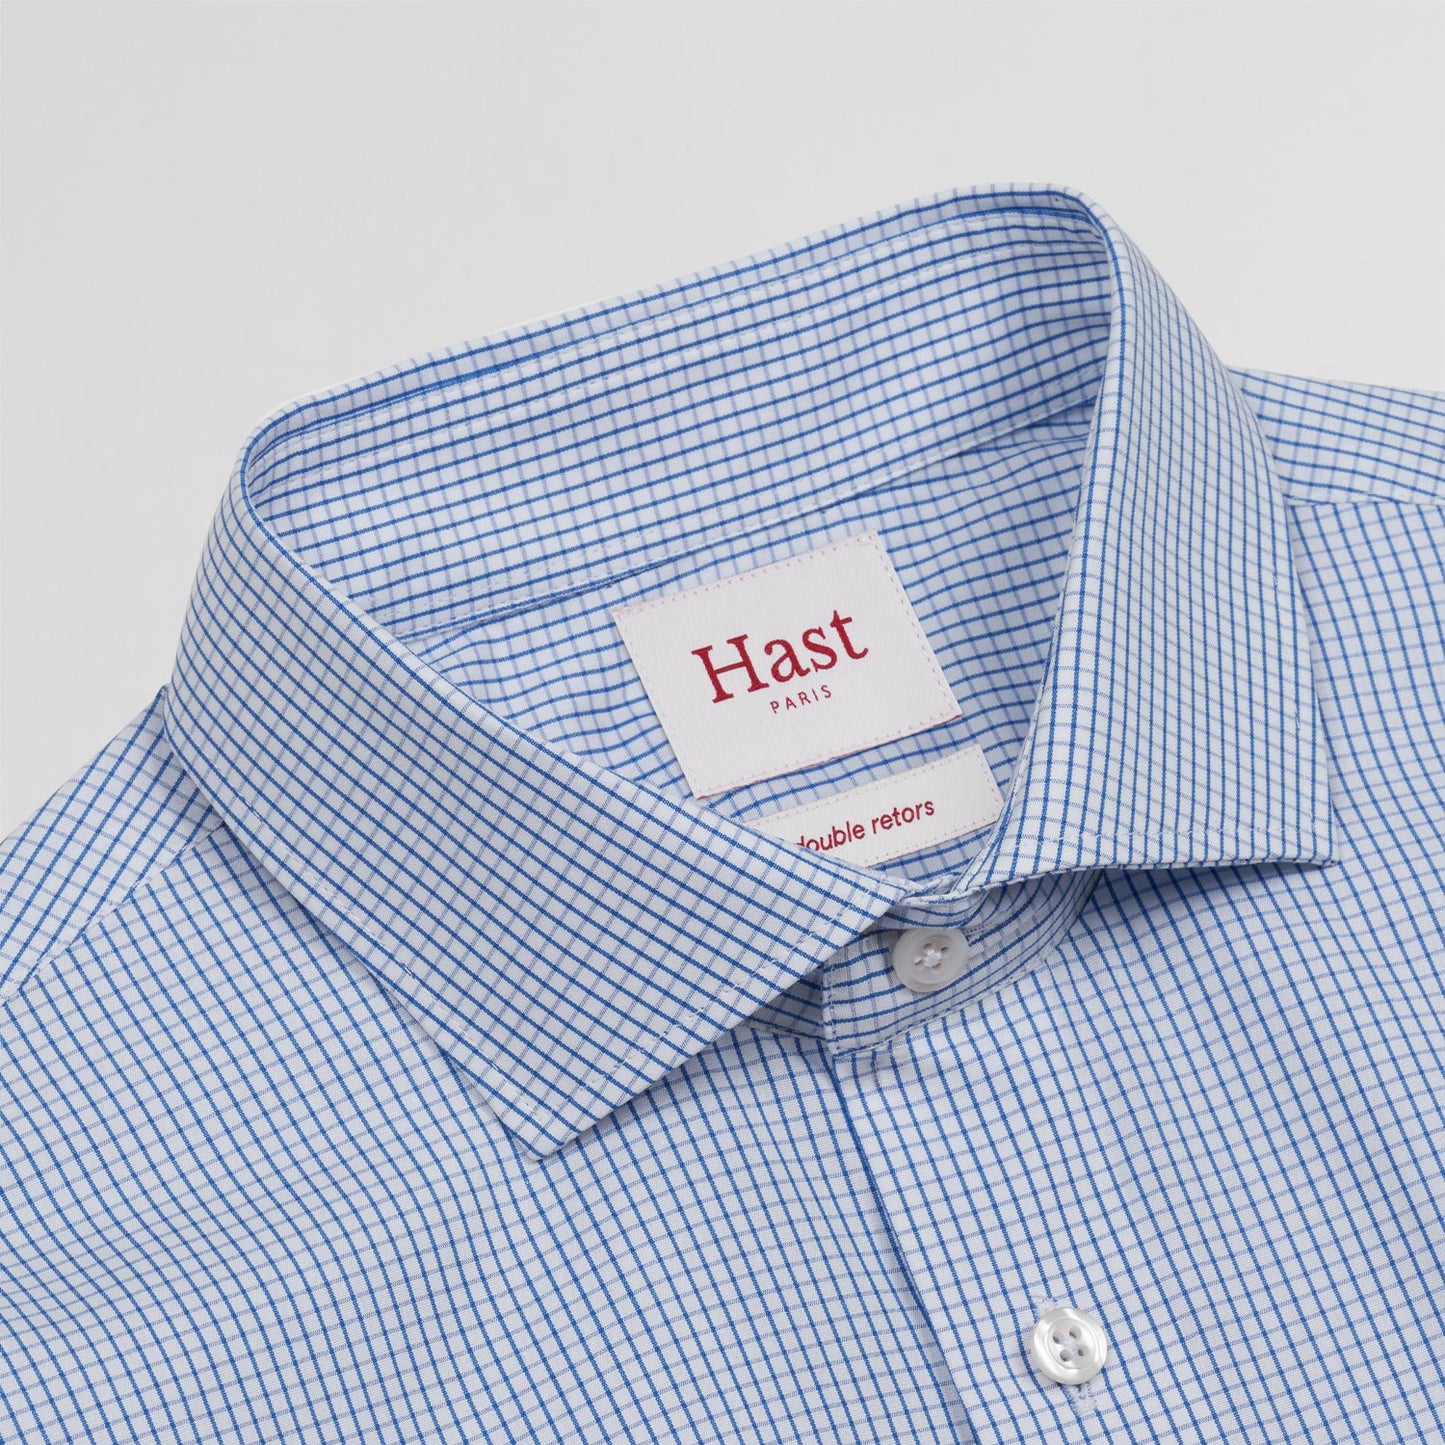 Fitted shirt in double-twisted poplin with dark blue checks